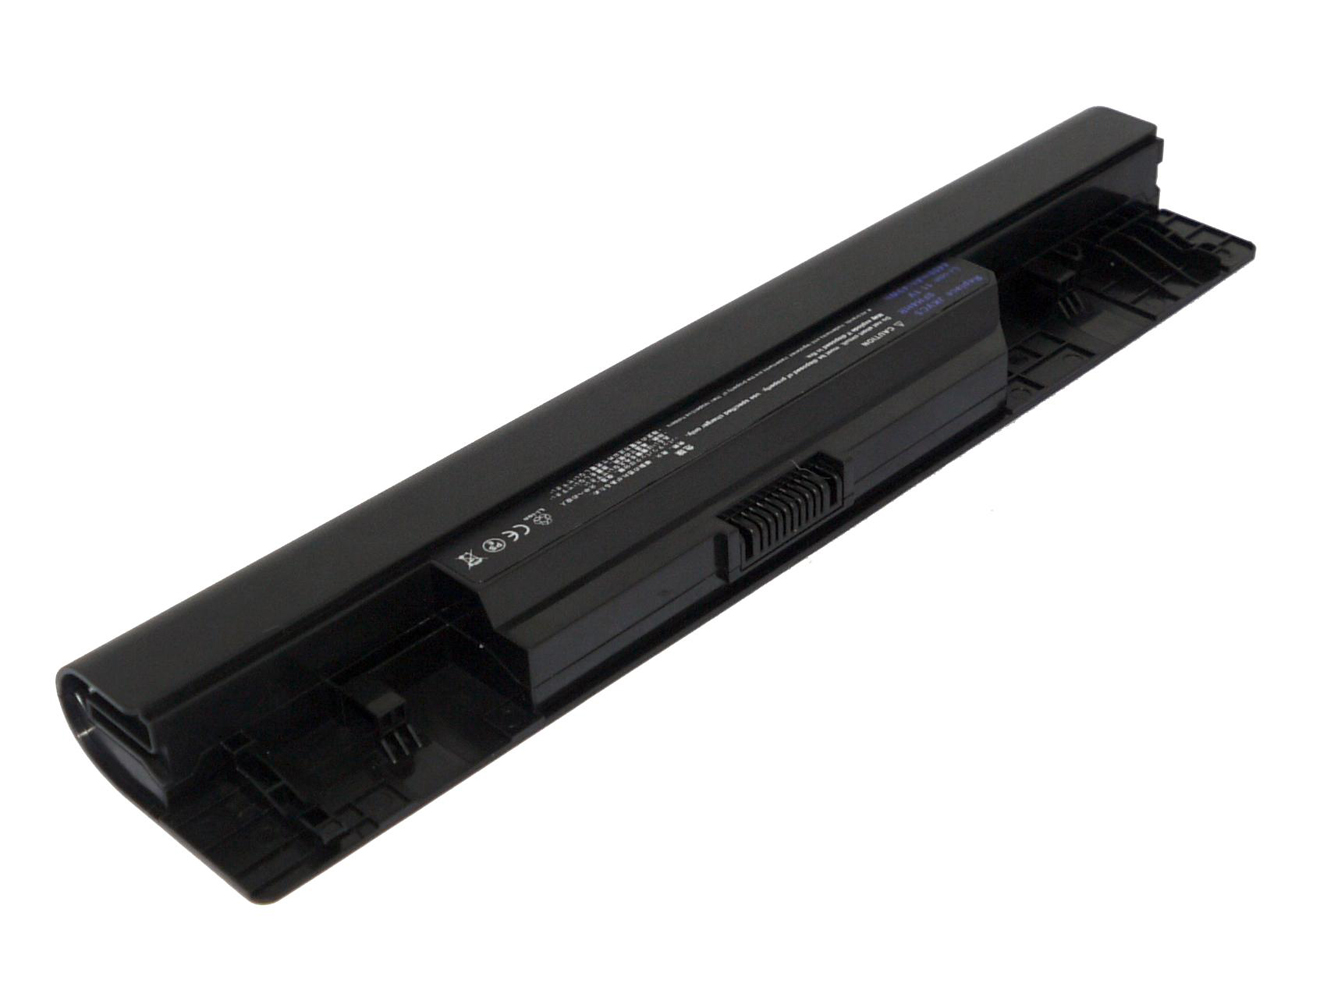 Dell 05y4yv, 0fh4hr Laptop Batteries For Dell Inspiron 14, Dell Inspiron 1464 replacement